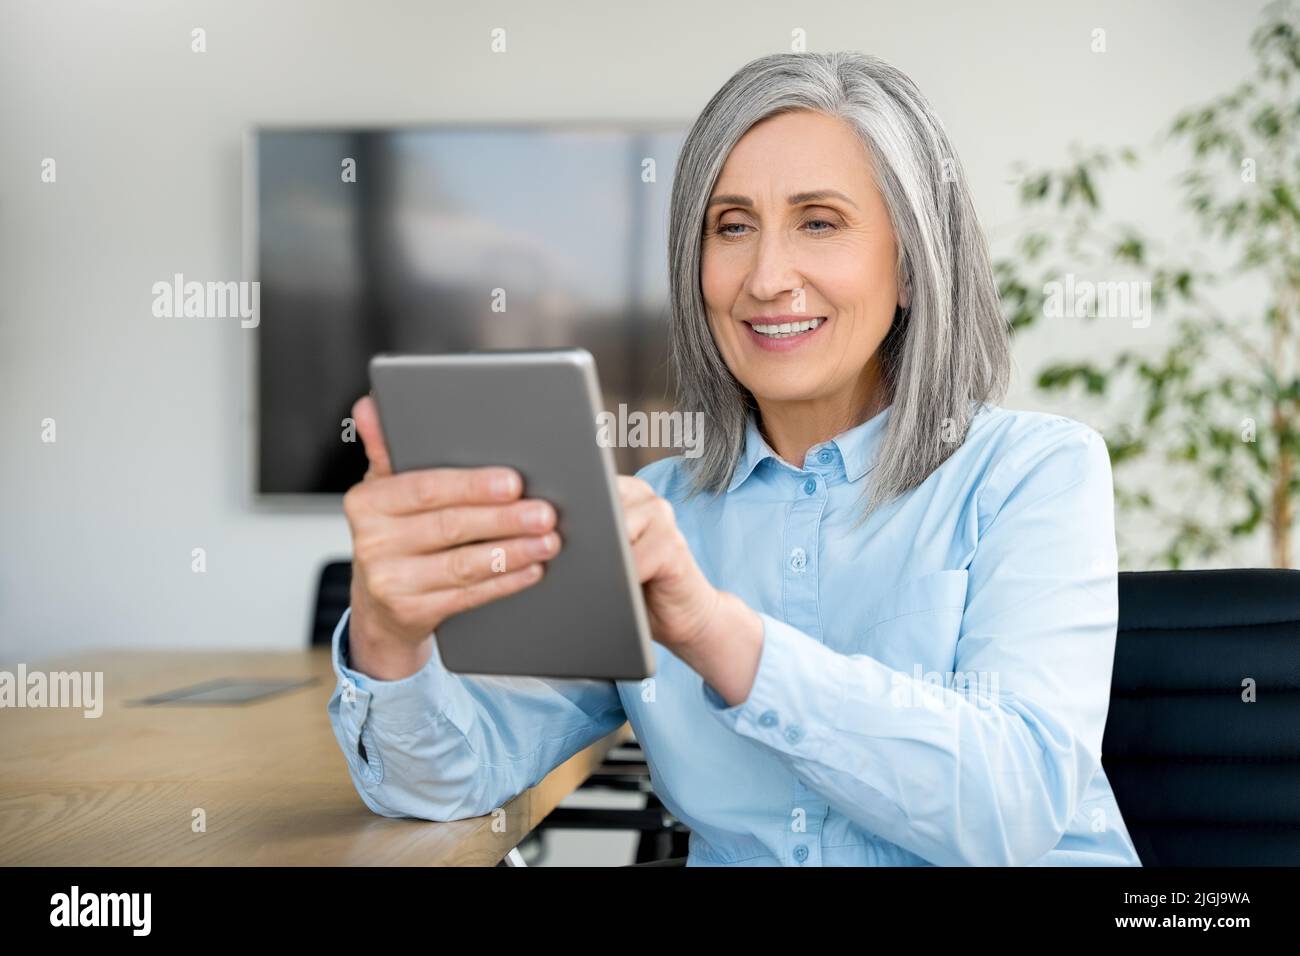 Smiling mature businesswoman sit in office and using digital tablet Stock Photo